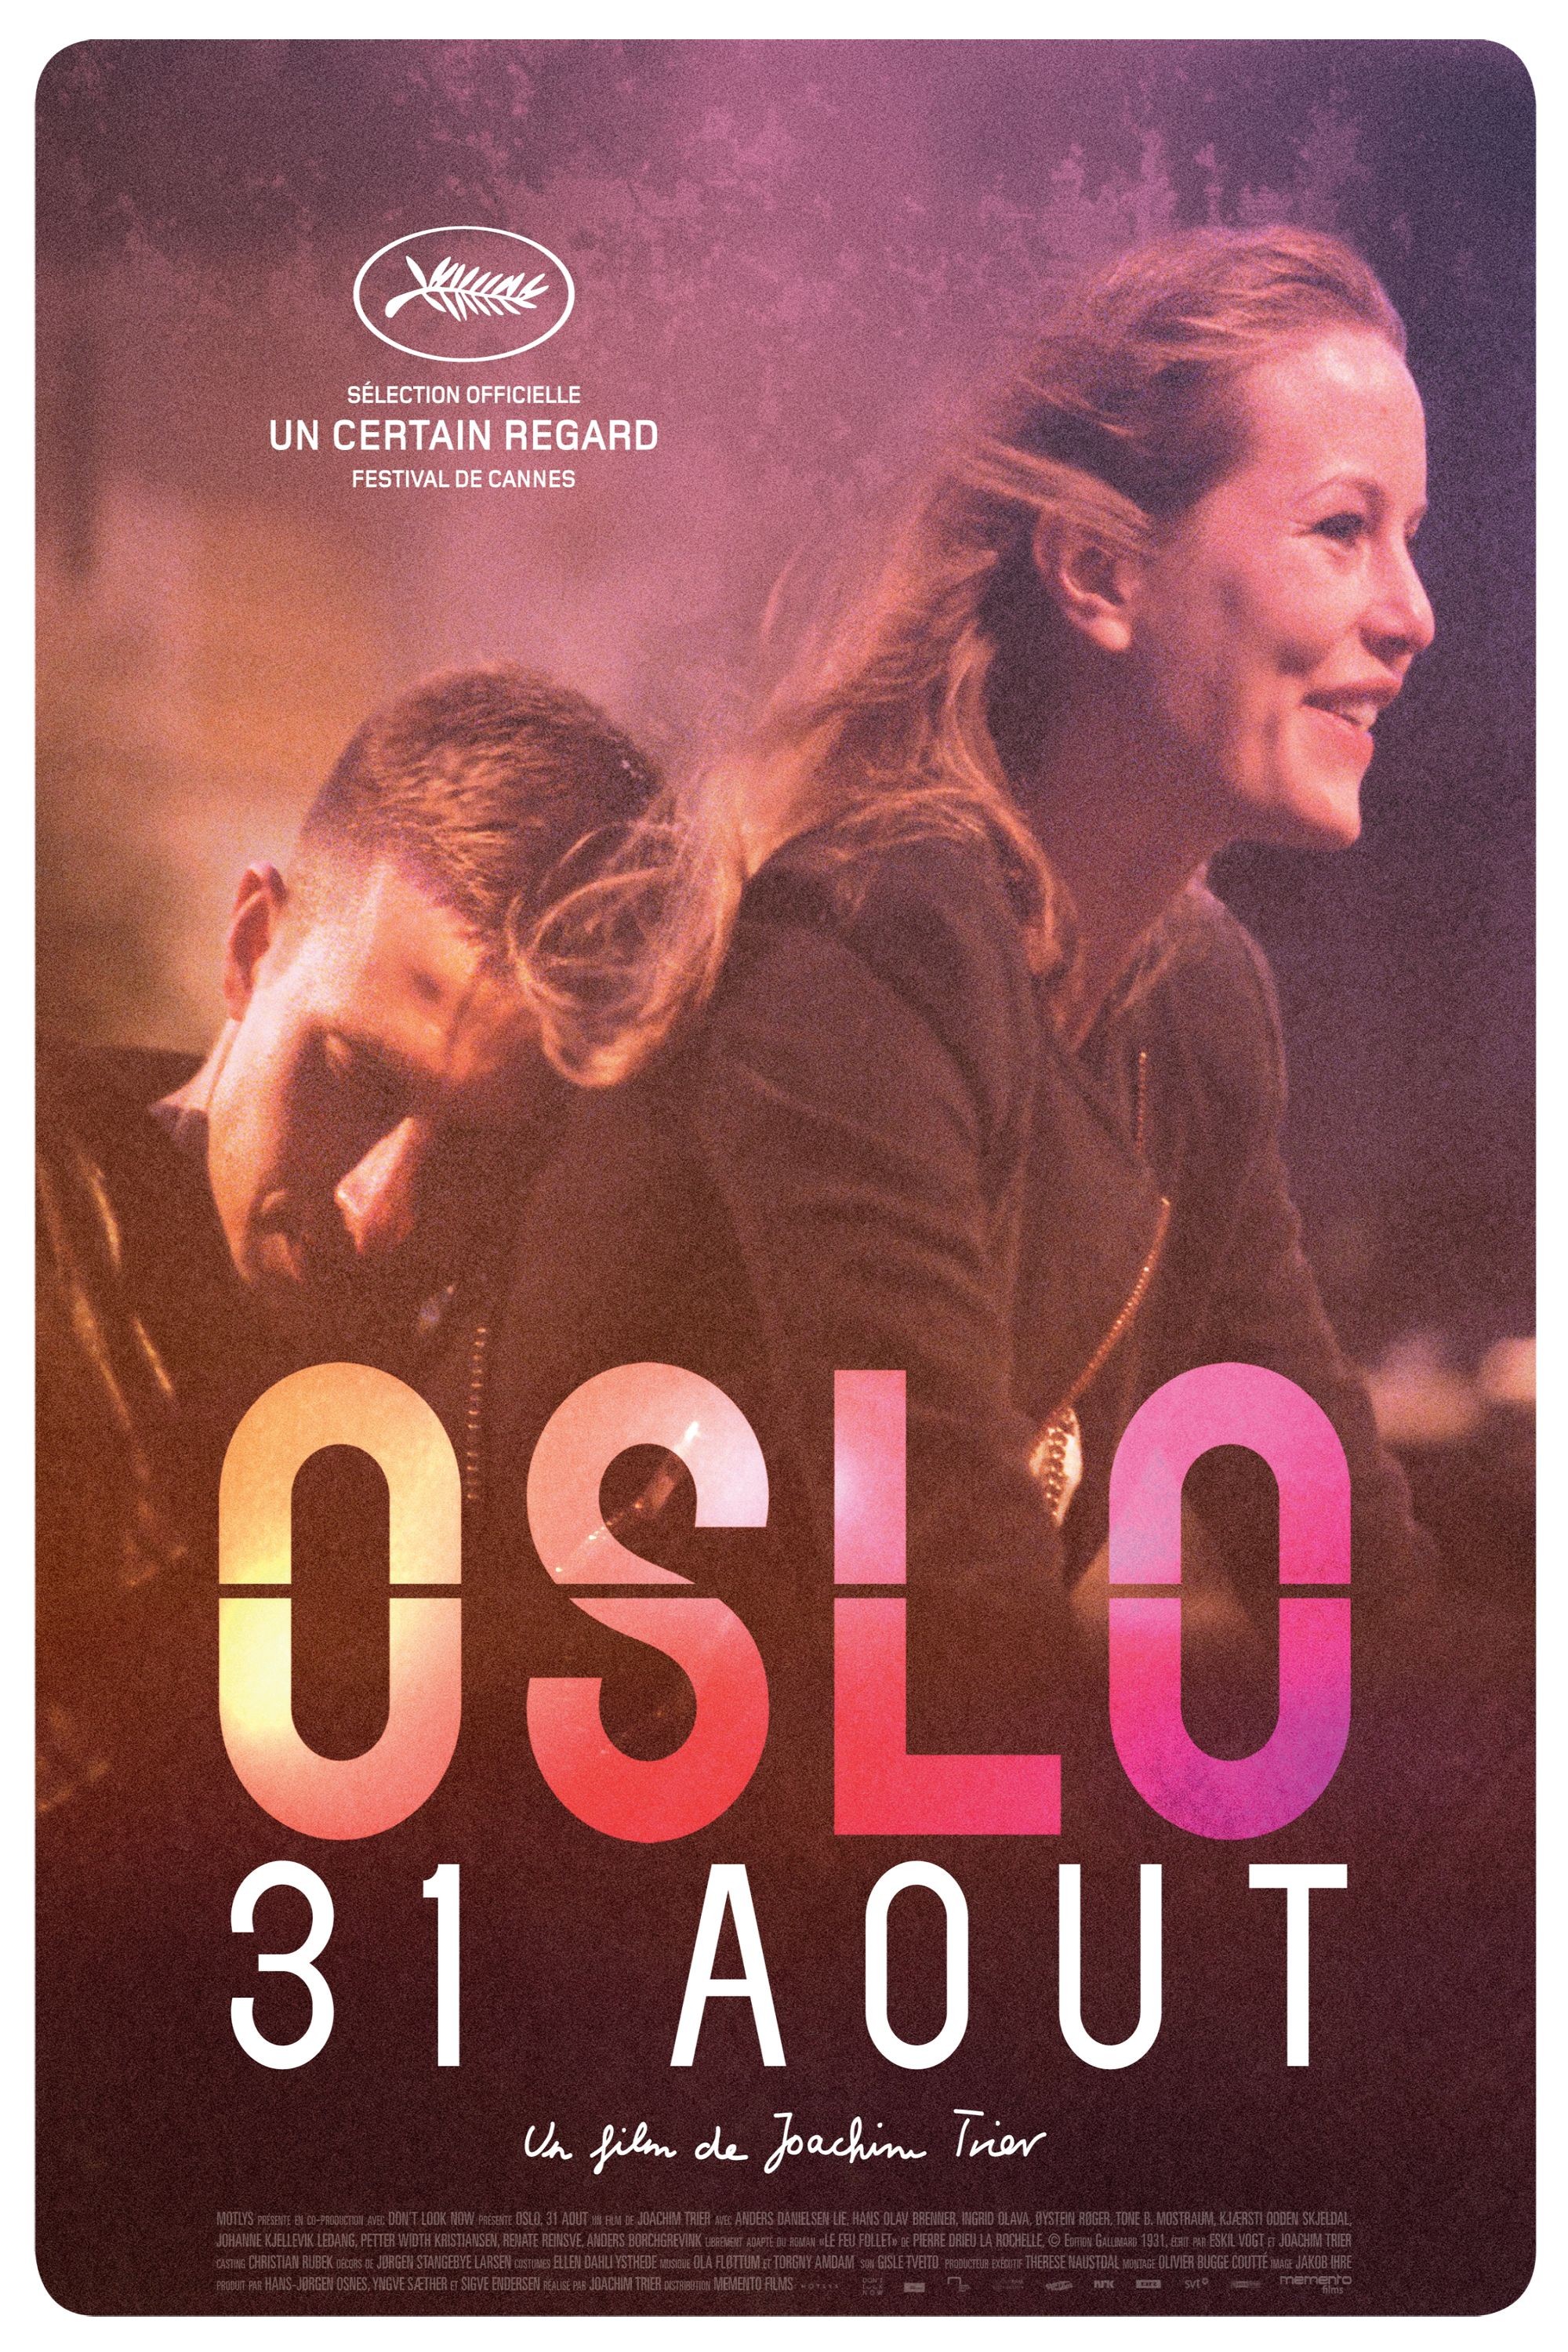 OSLO, AUGUST 31ST